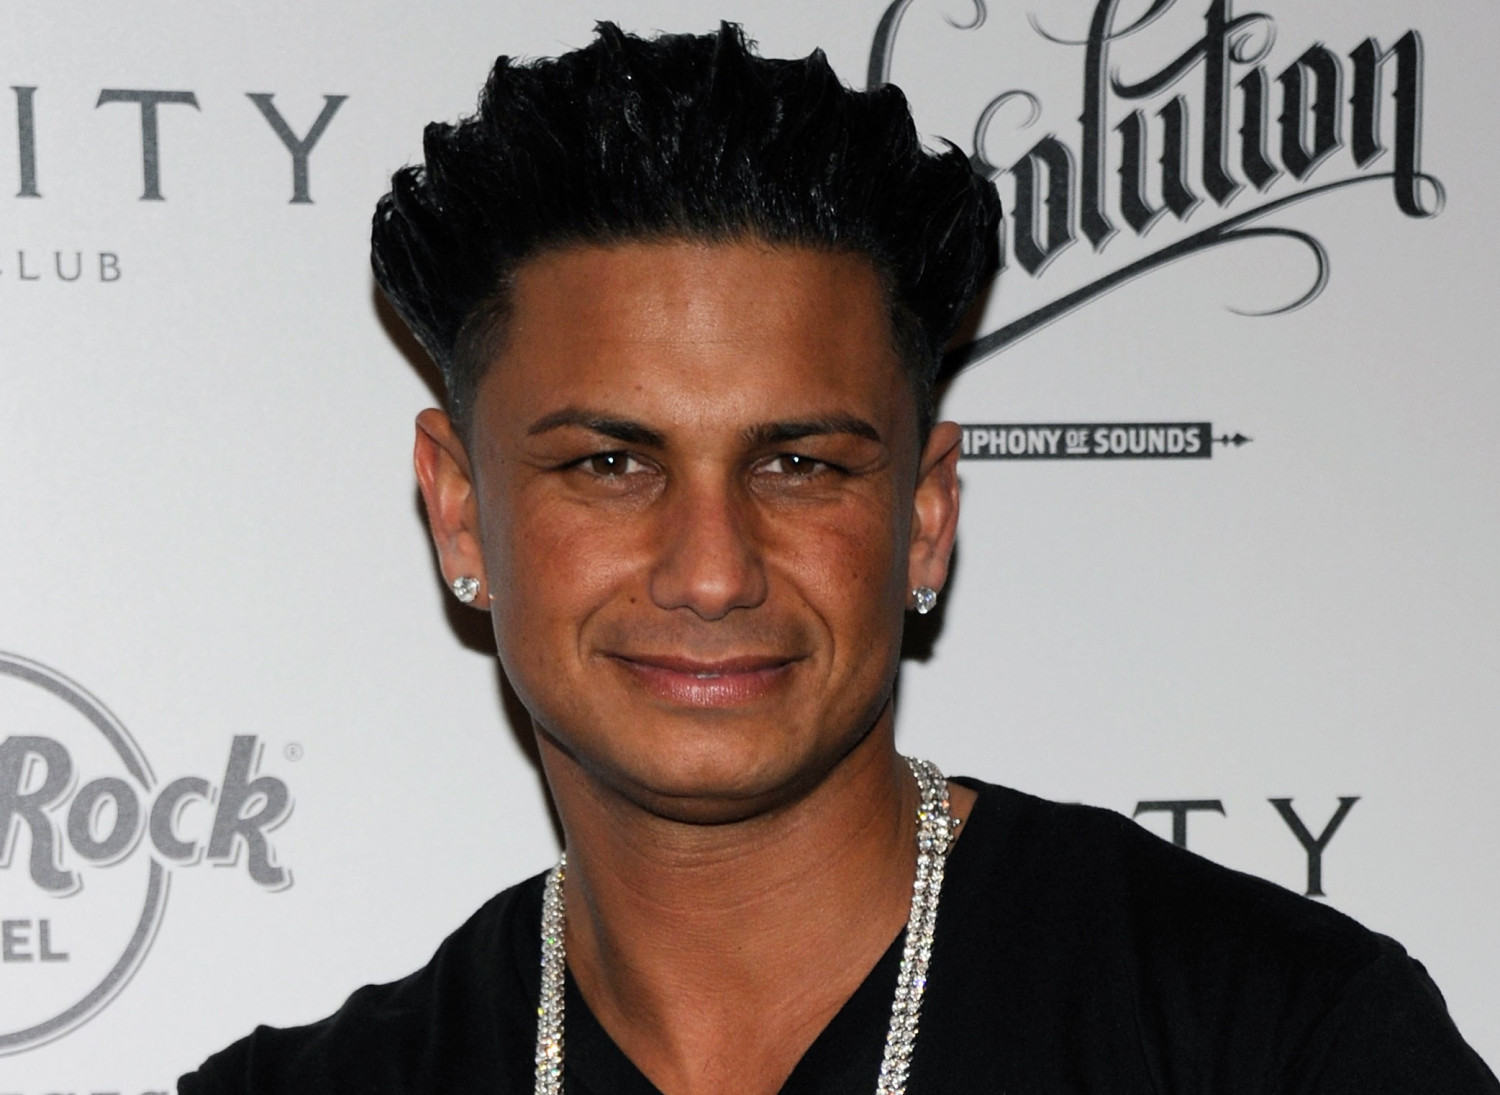 Pauly d and michael cera